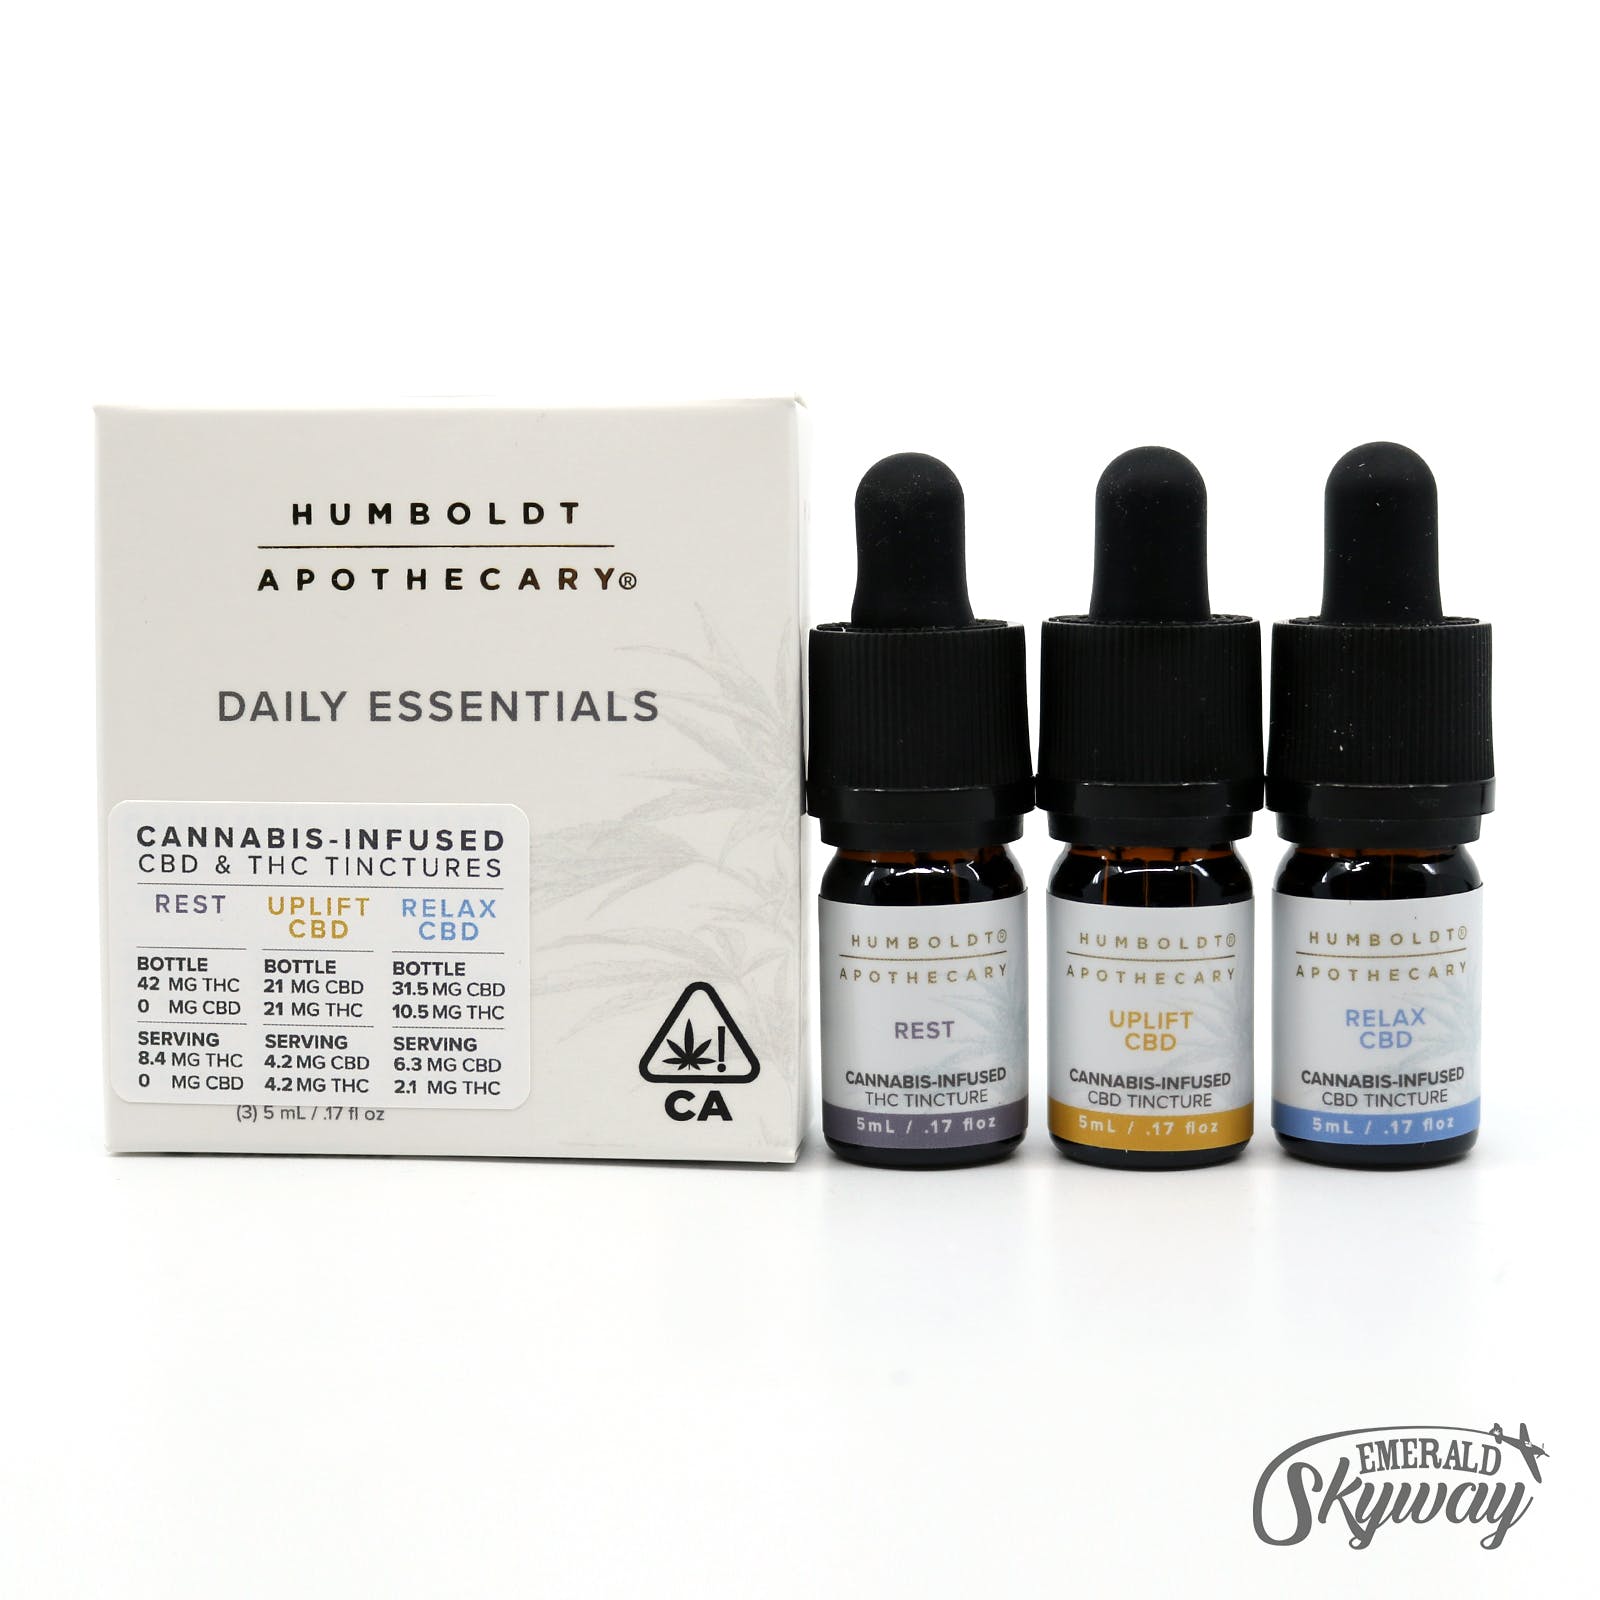 Humboldt Apothecary Daily Essentials